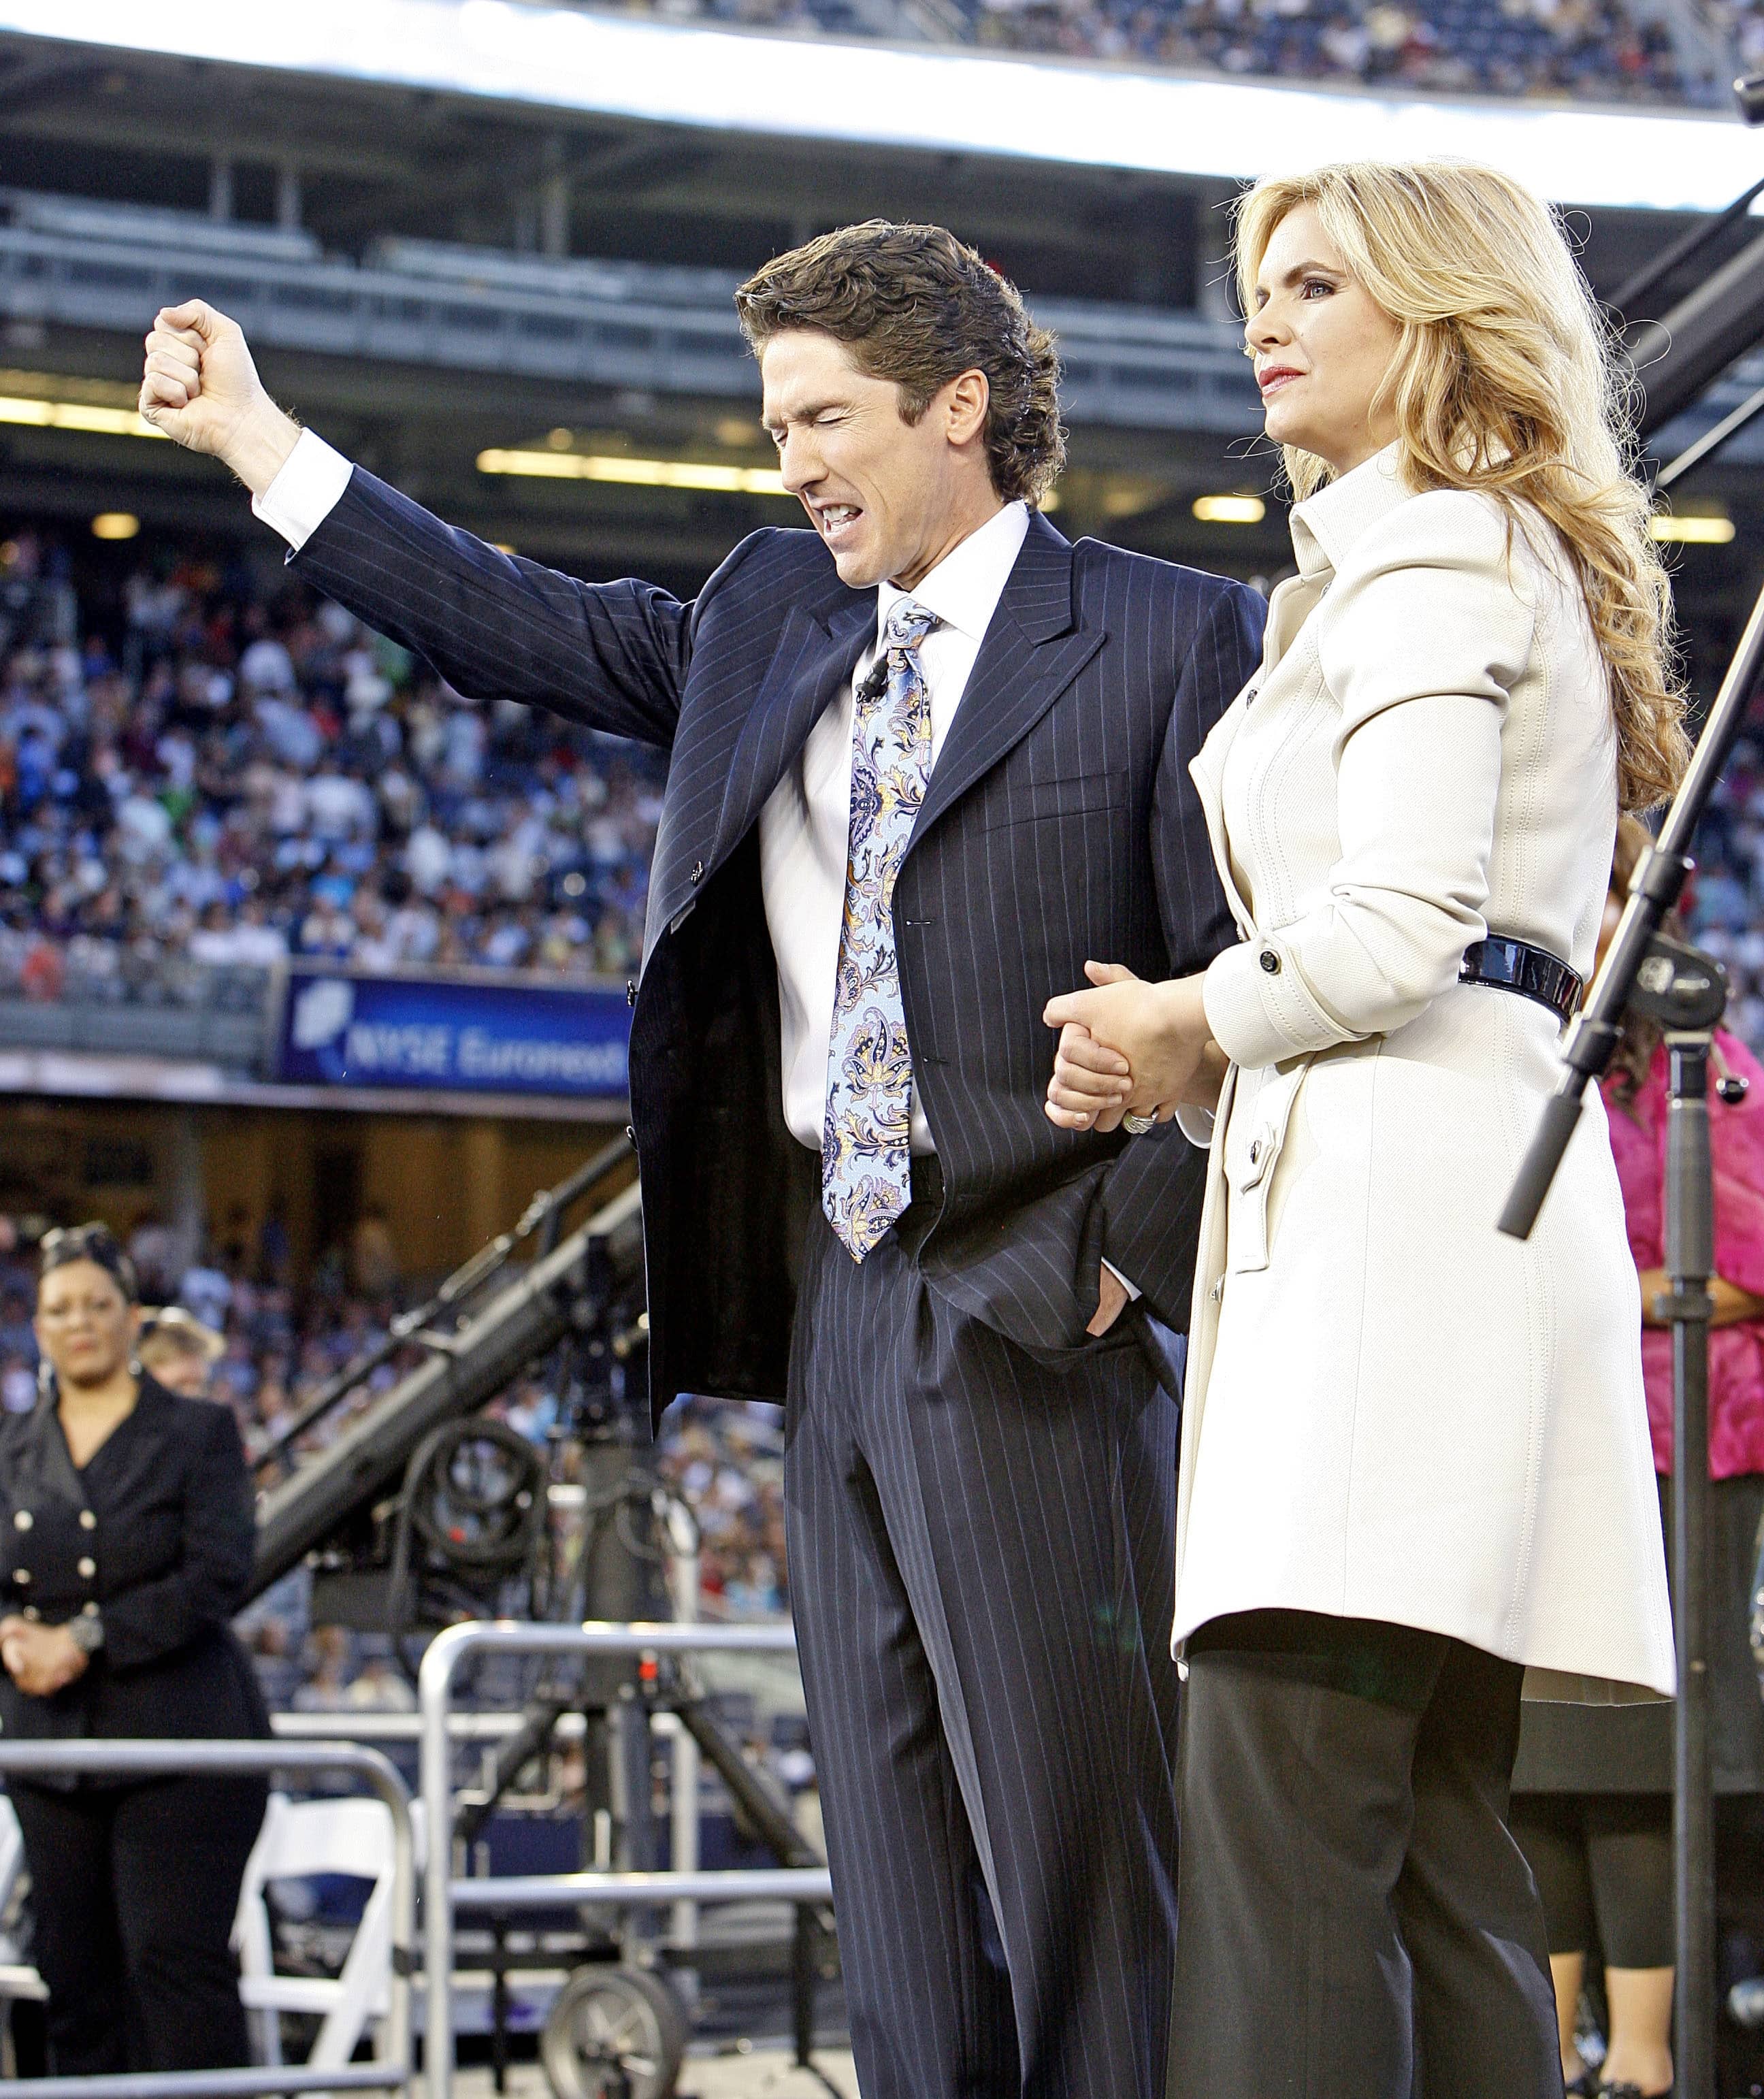 10 Quotes for Hope by Joel and Victoria Osteen - Beliefnet